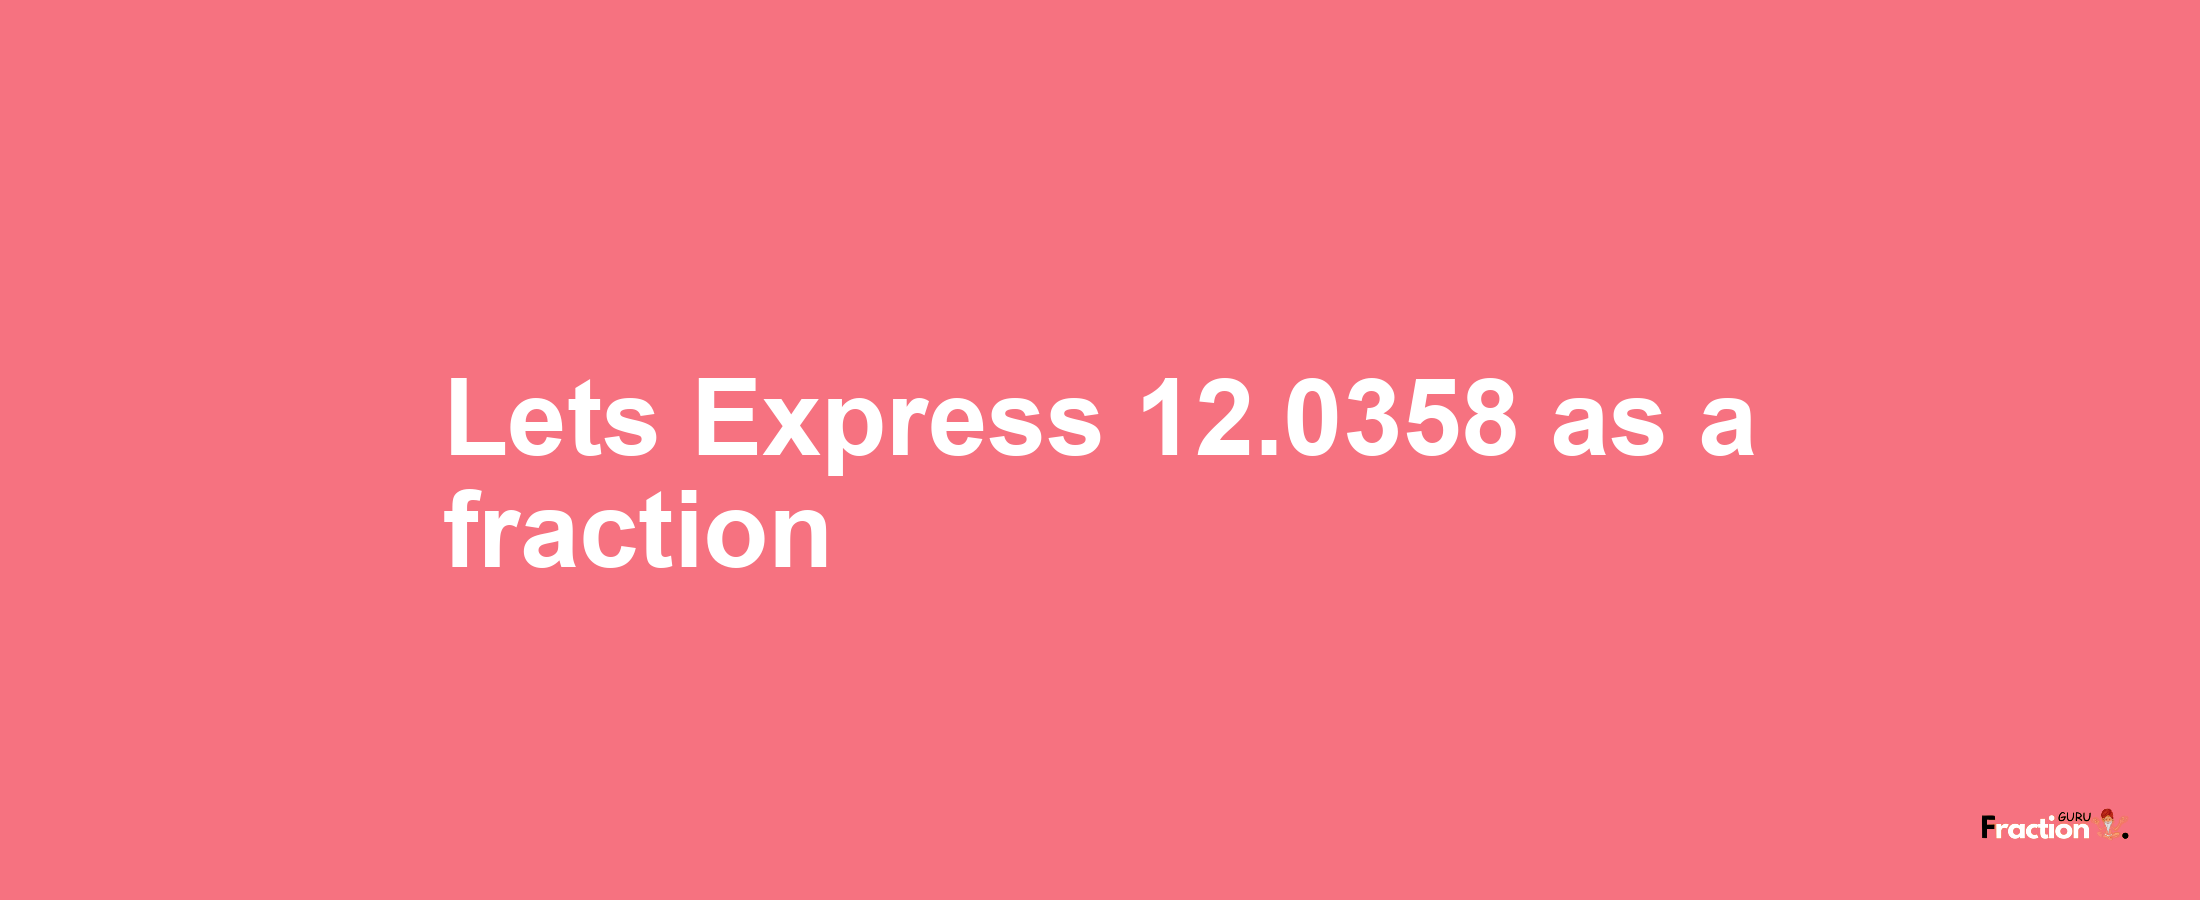 Lets Express 12.0358 as afraction